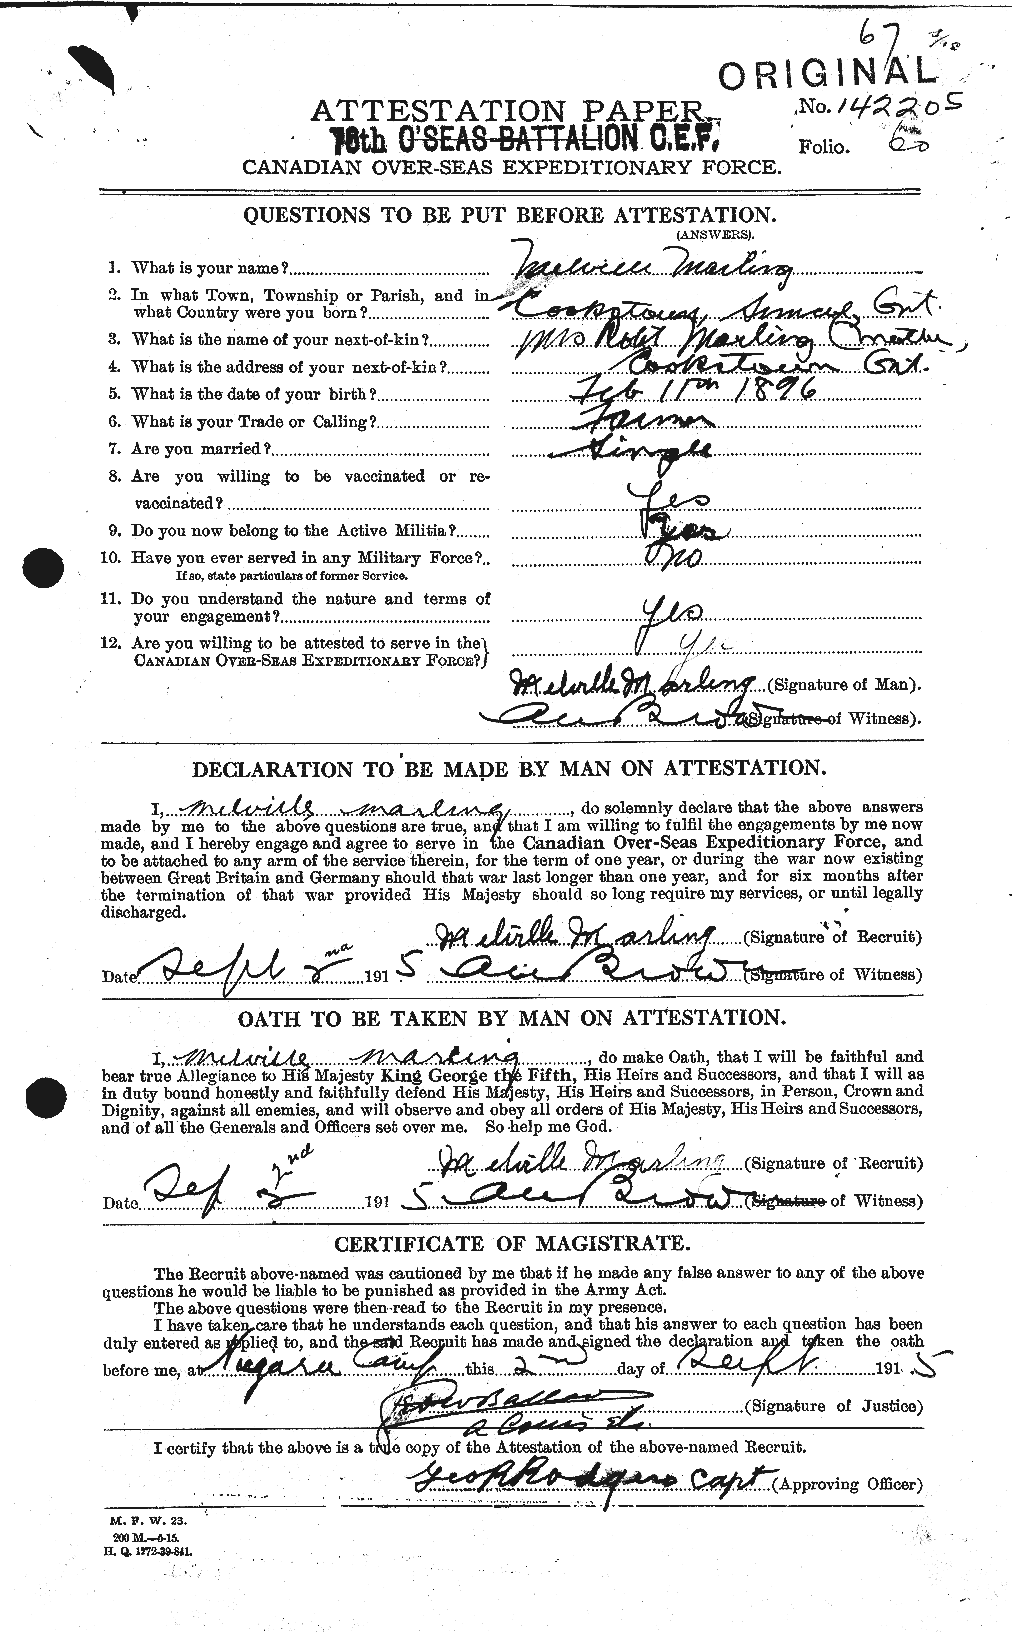 Personnel Records of the First World War - CEF 485365a